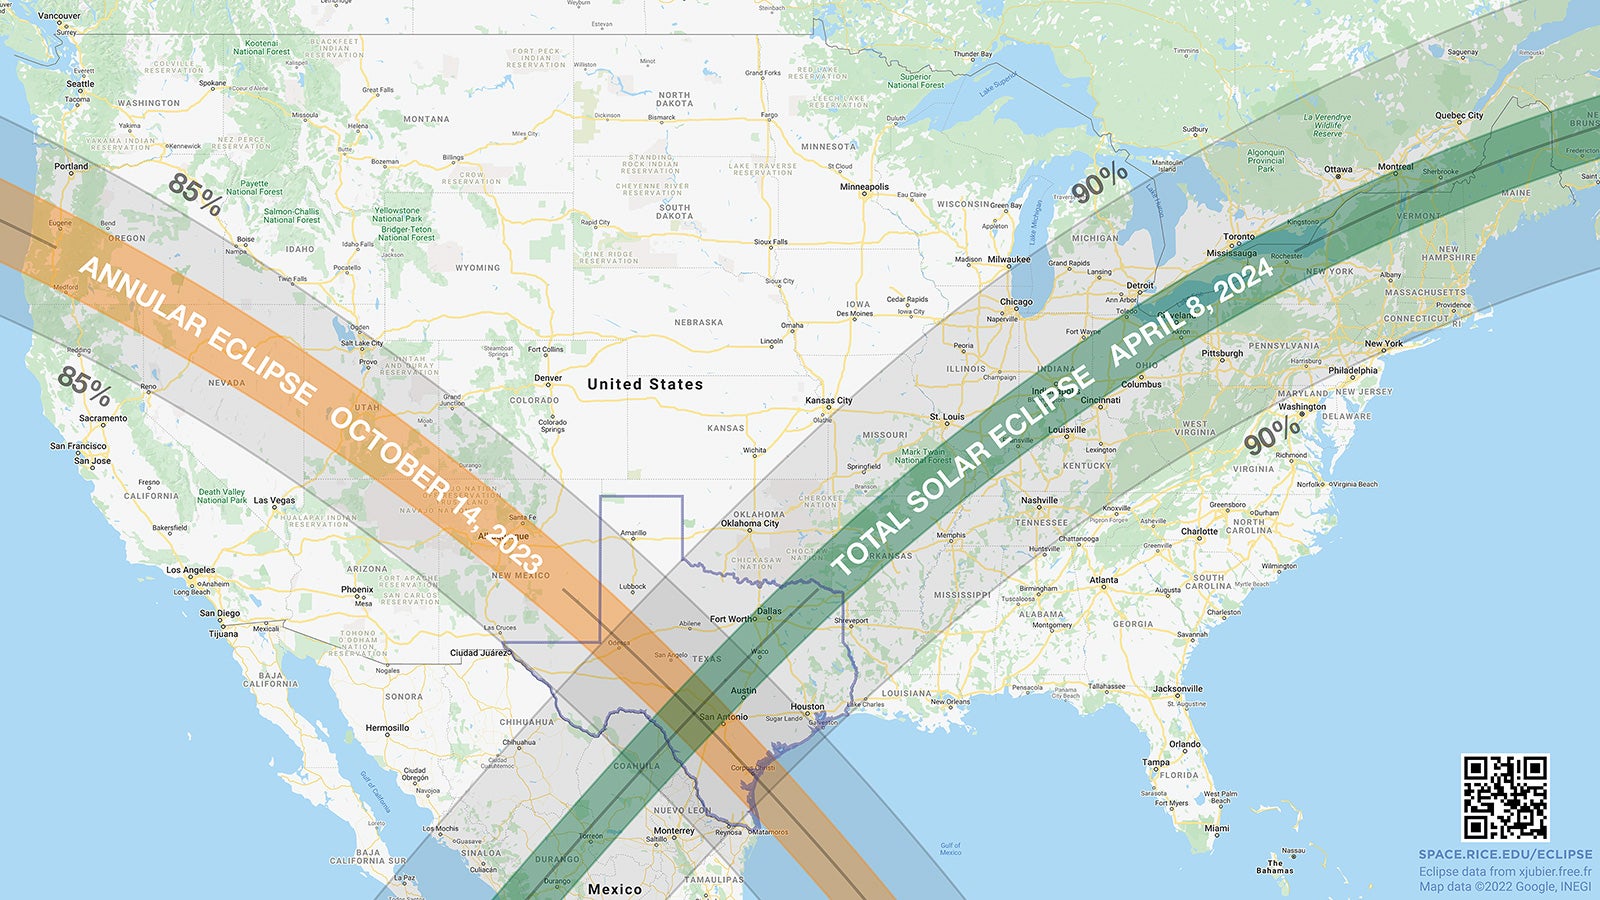 Texas Eclipse Map